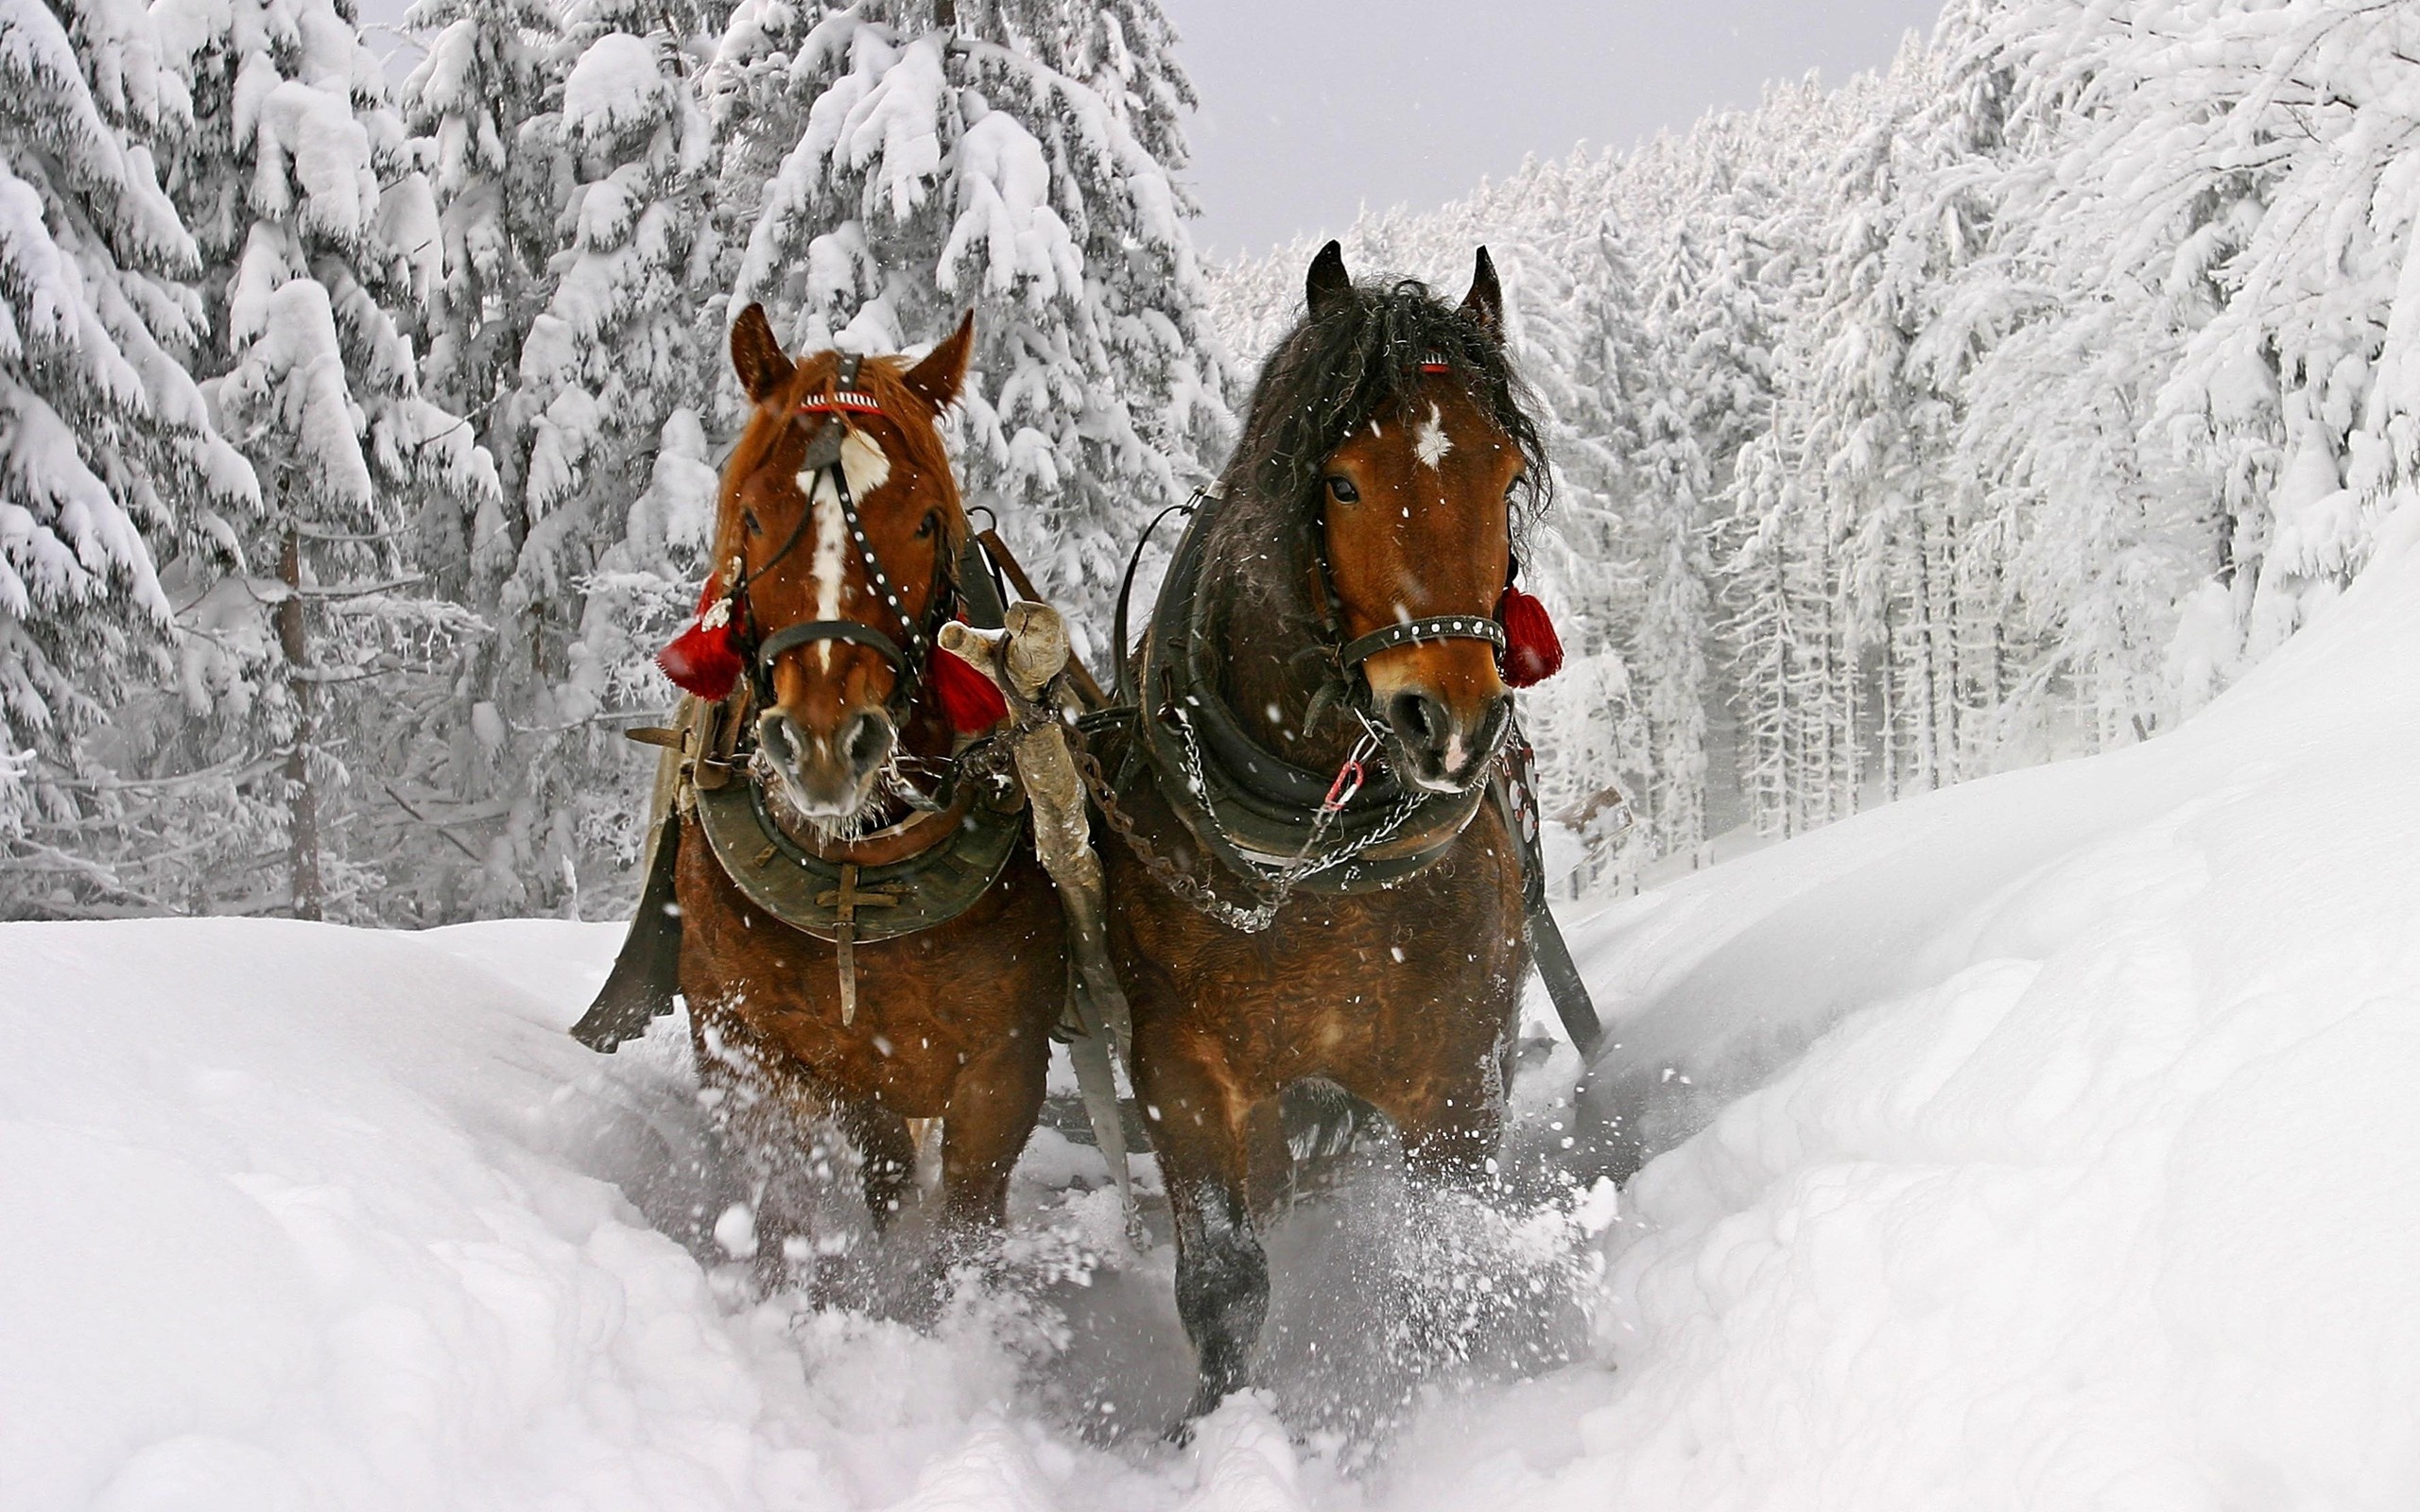 Quotes about horses in the snow, Poetic expressions, Equestrian inspiration, Winter reflections, 2560x1600 HD Desktop